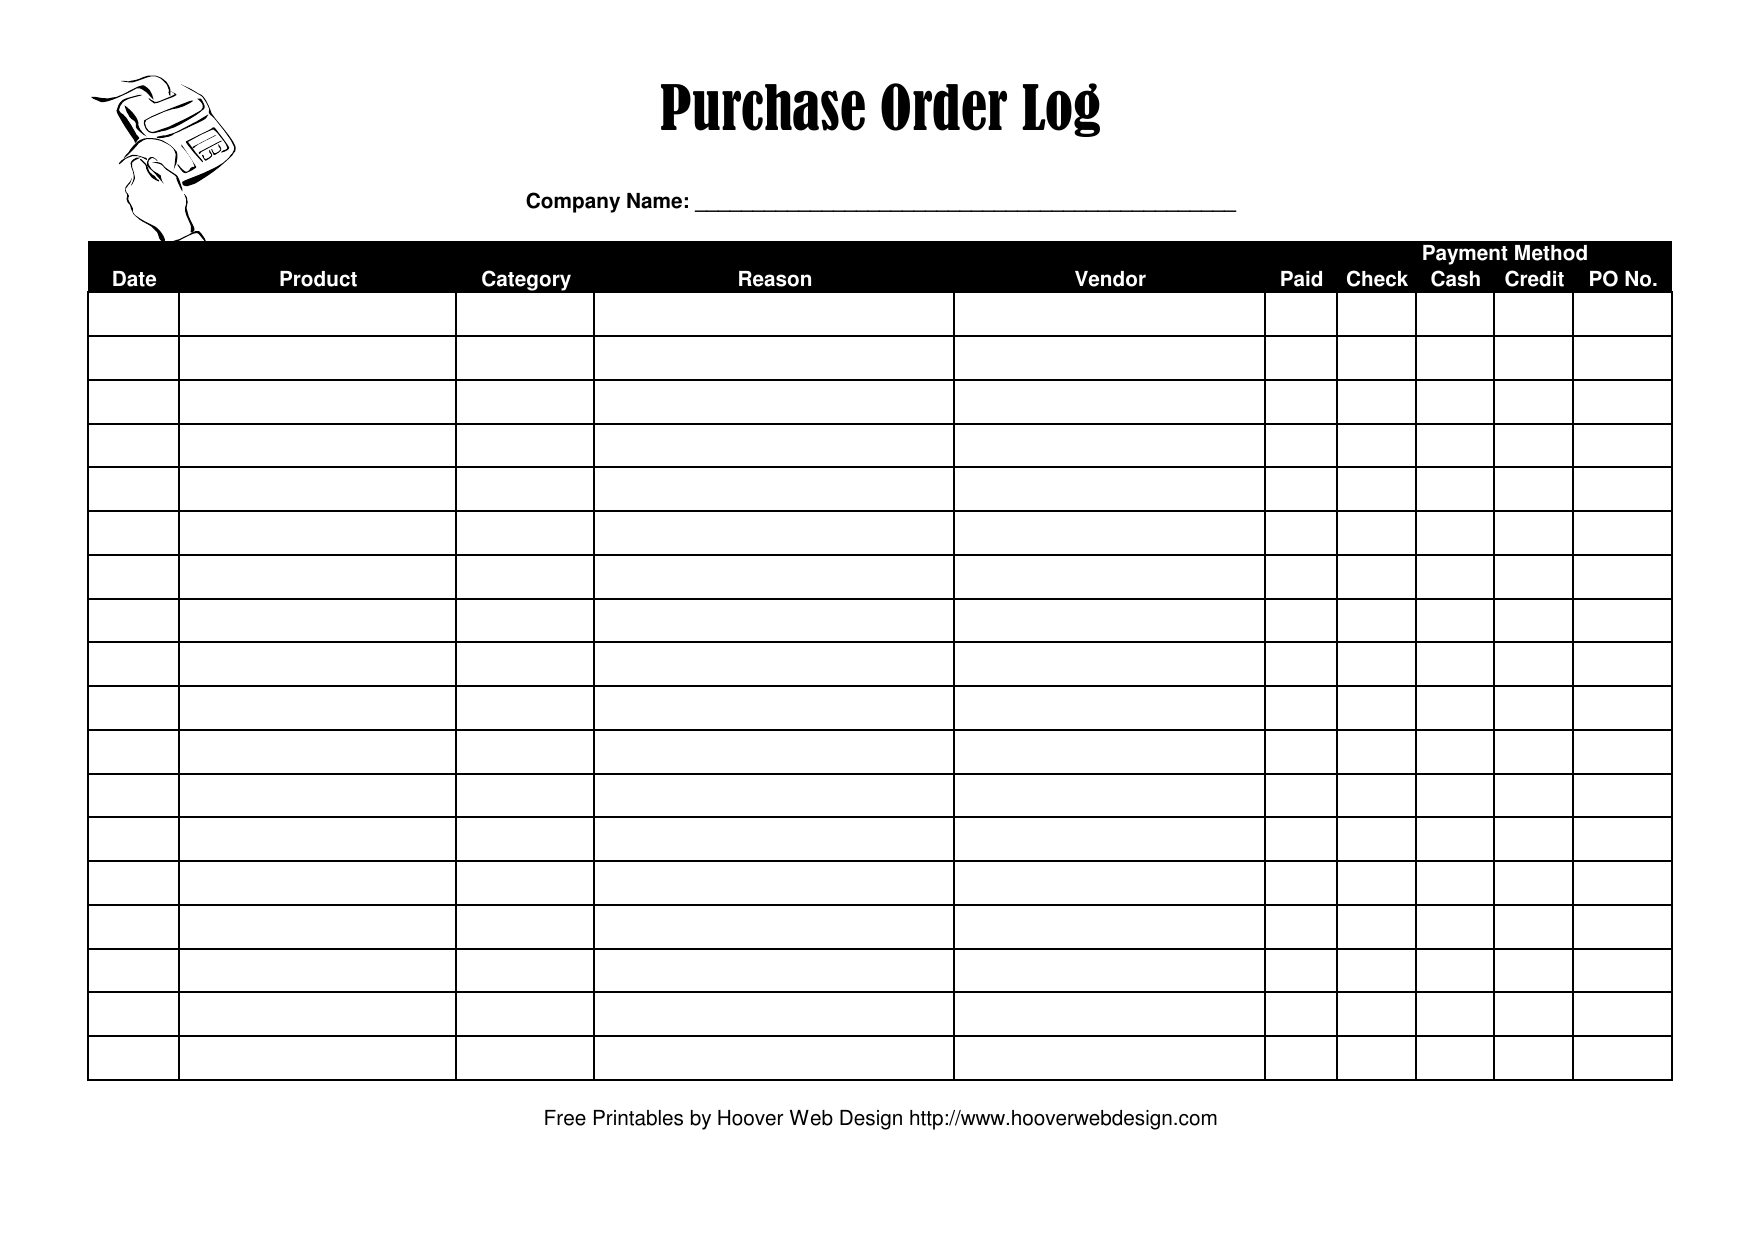 Purchase Order Log Excel Template